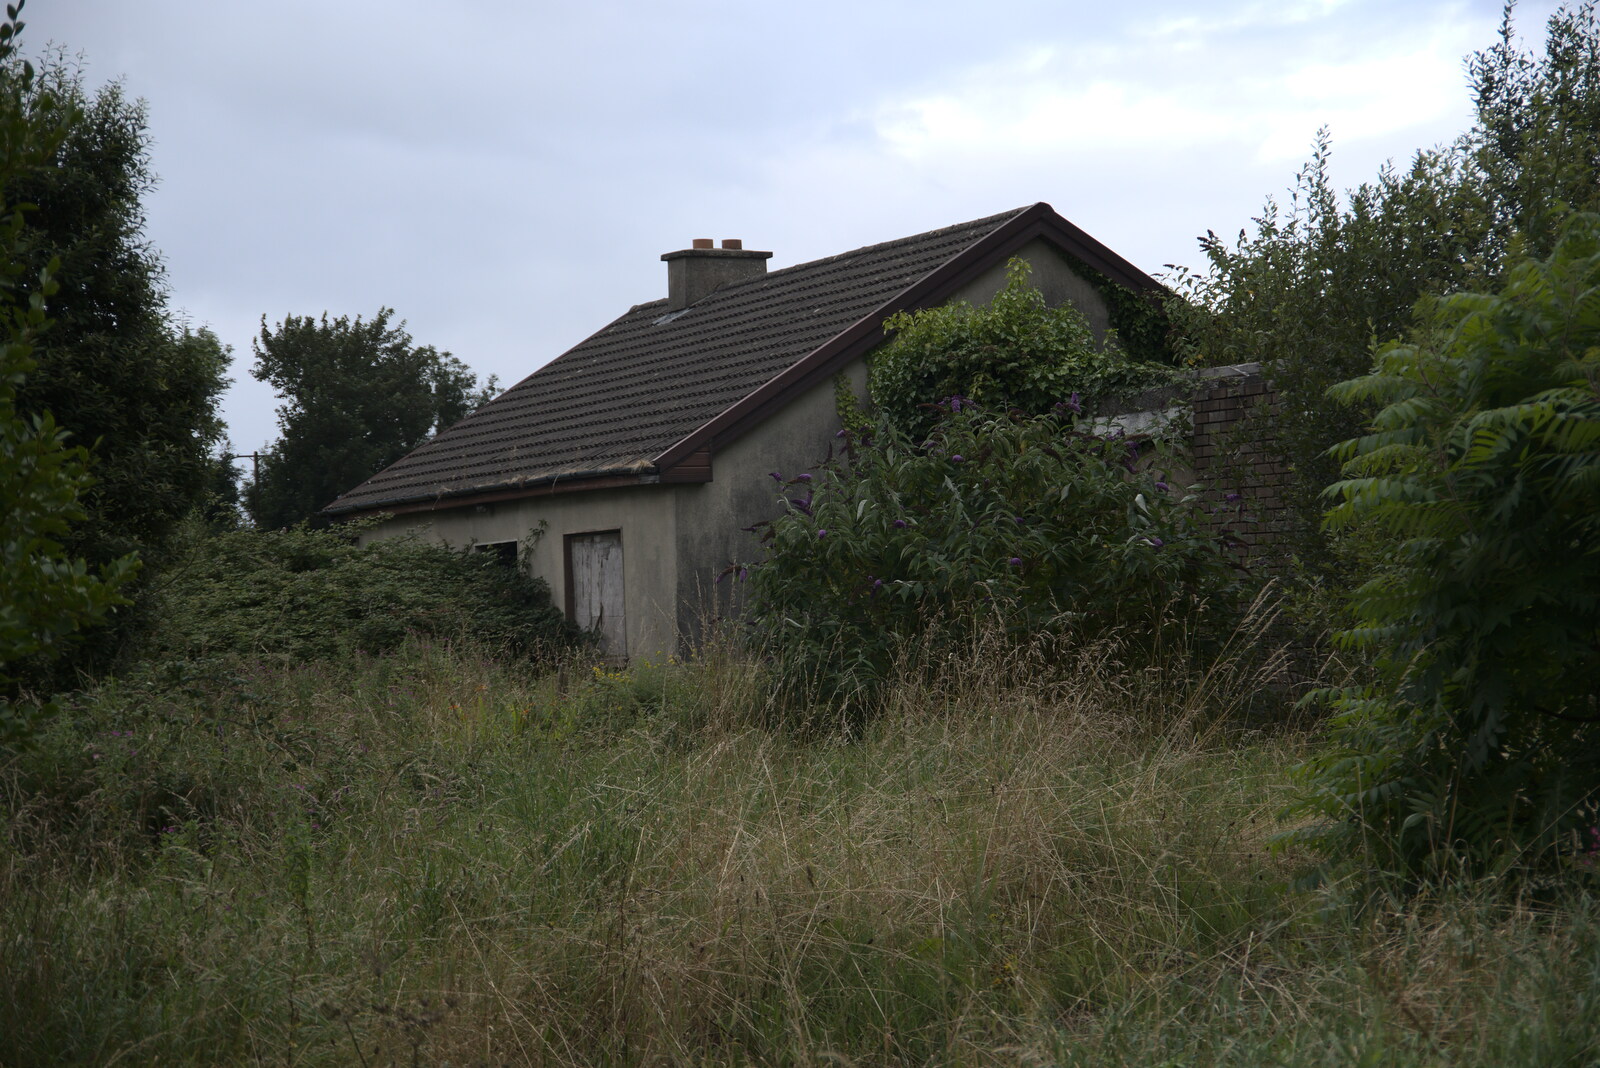 A derelict house in the wilderness from Walks Around Benbulben and Carrowmore, County Sligo, Ireland - 13th August 2021